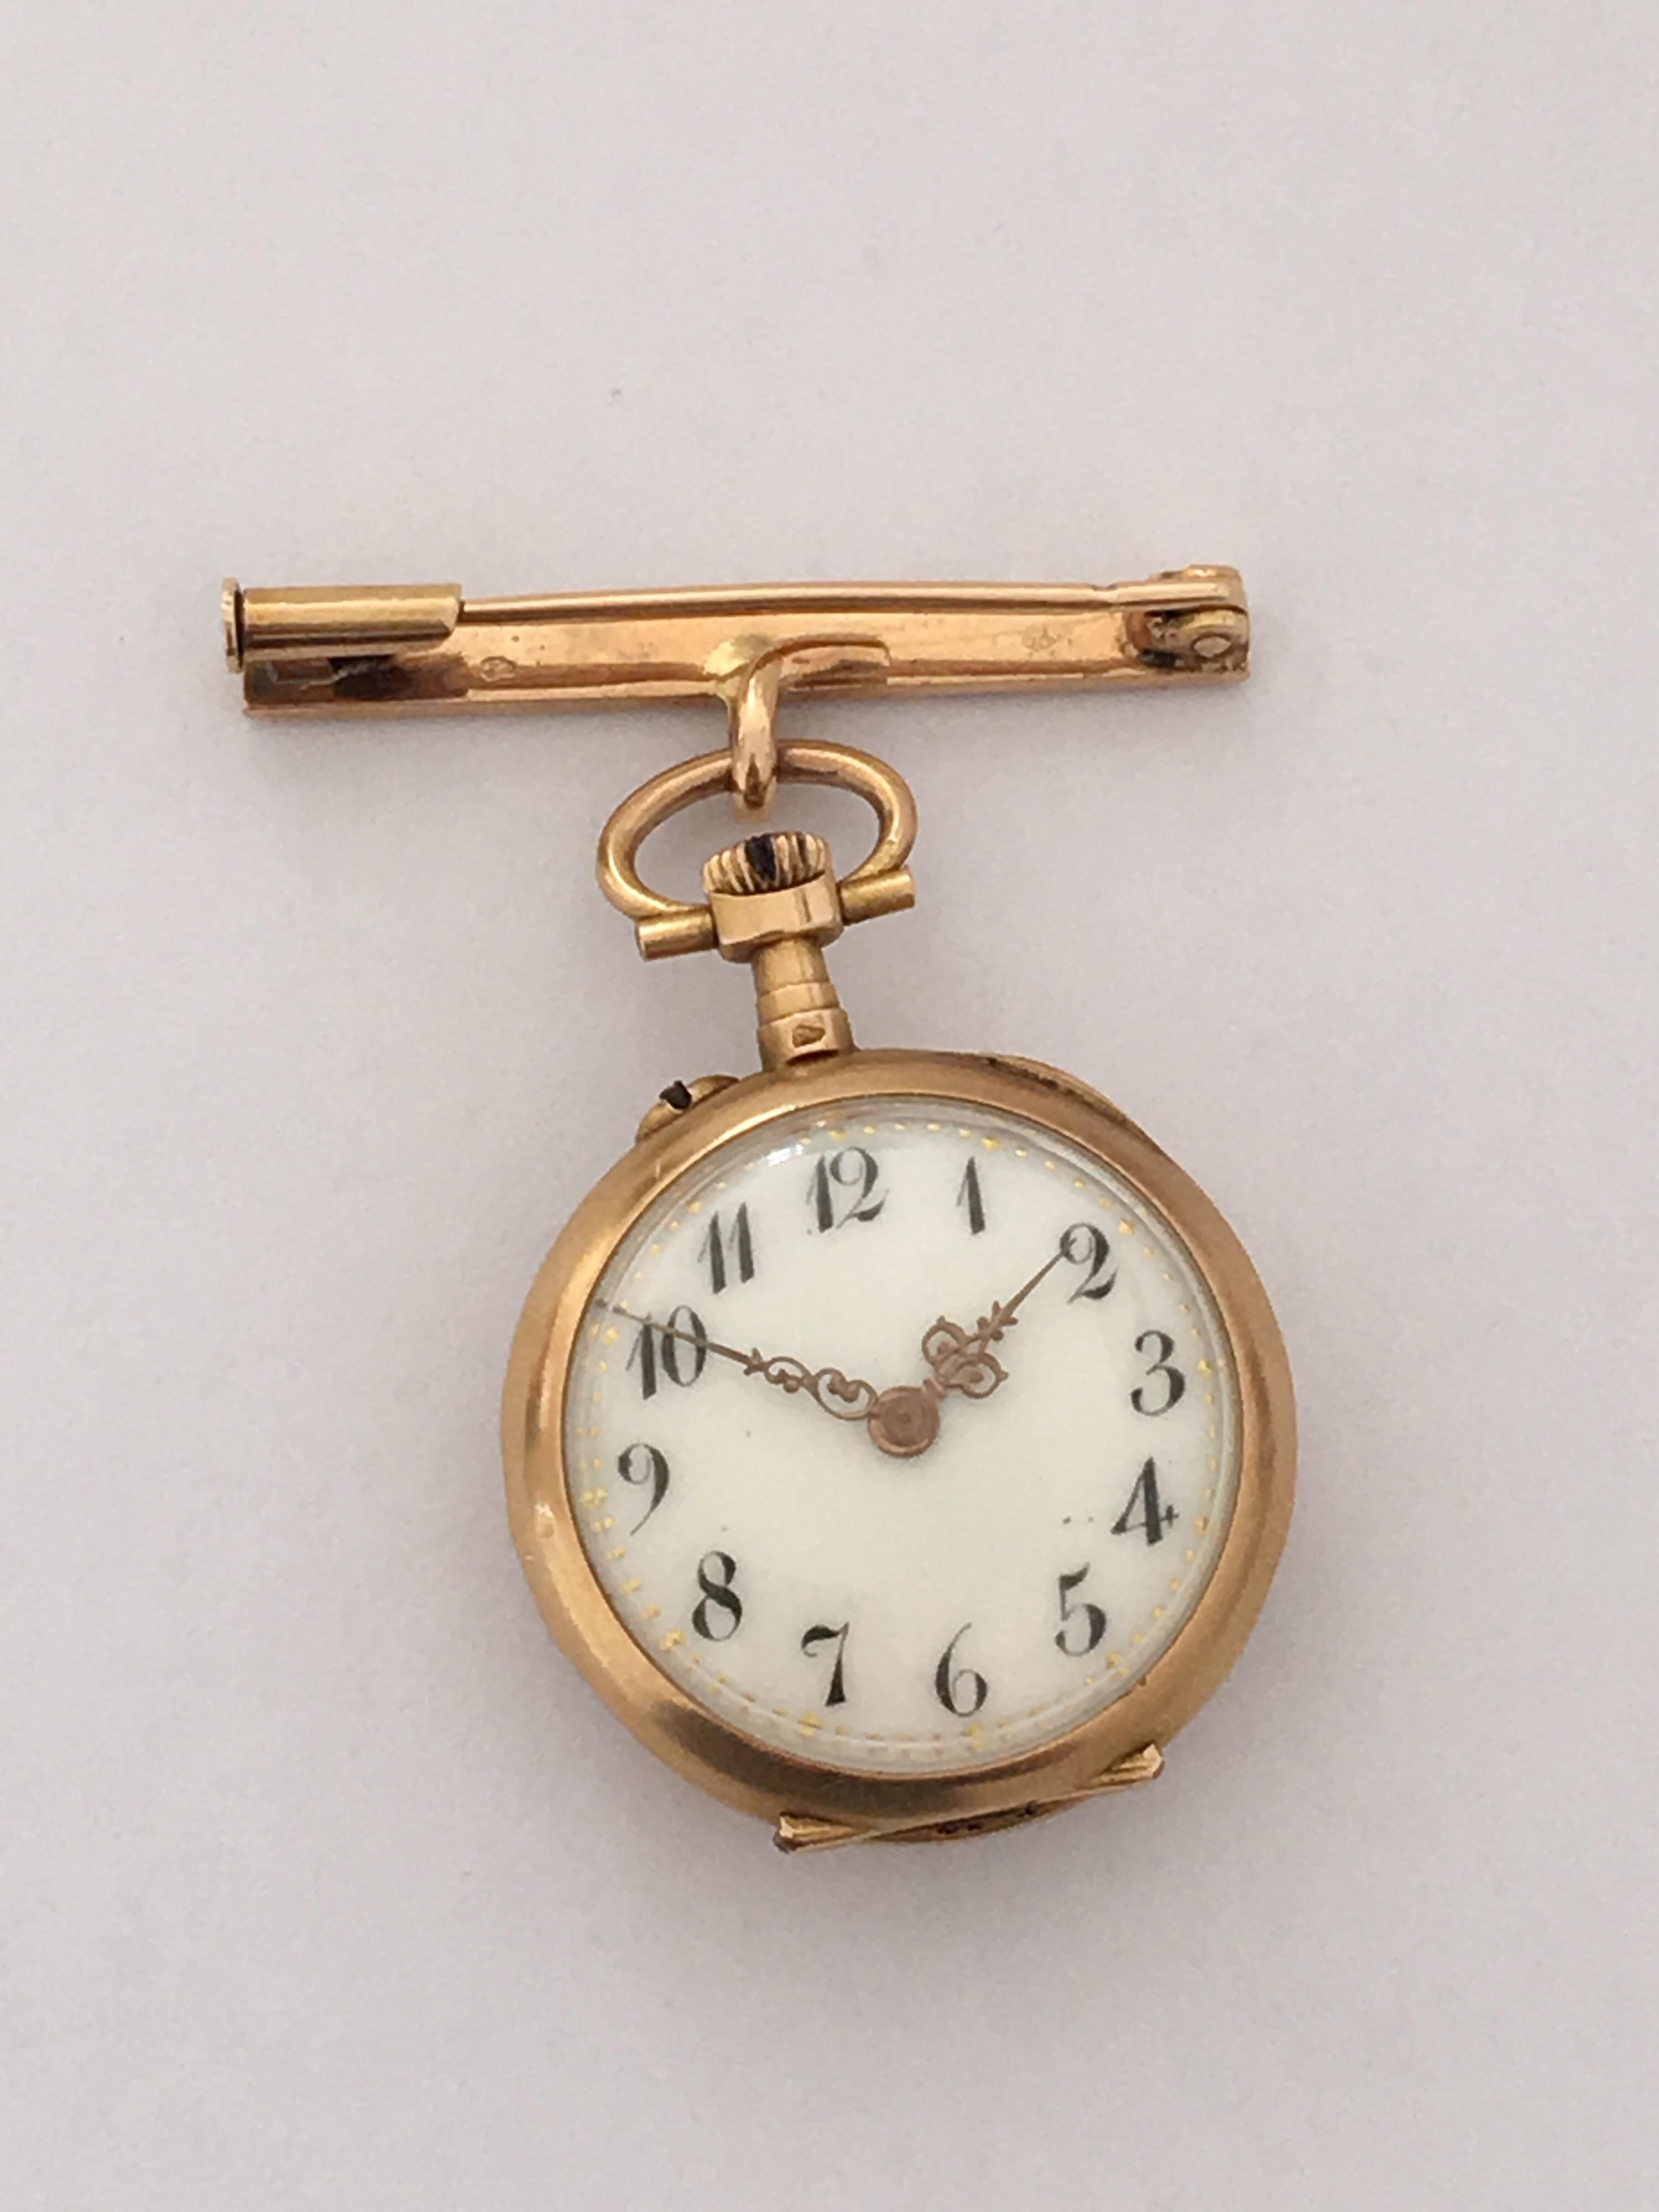 This beautiful 22mm diameter gold / diamonds brooch fob watch is in good working used condition. One piece of the diamond stone is missing and also there are some visible dents on the side of the watch as shown on the photos. And the winder gold